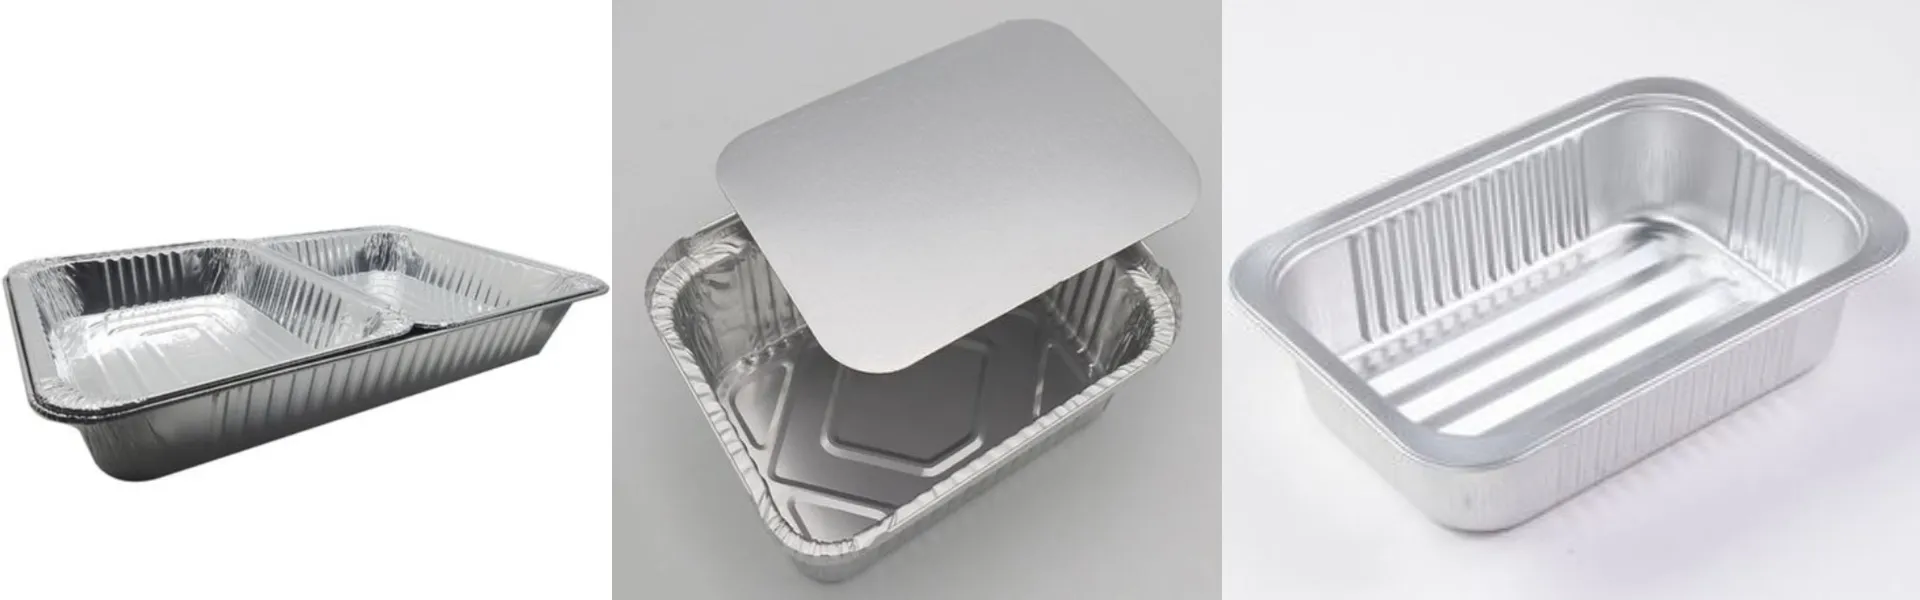 Aluminum Containers for Airlines